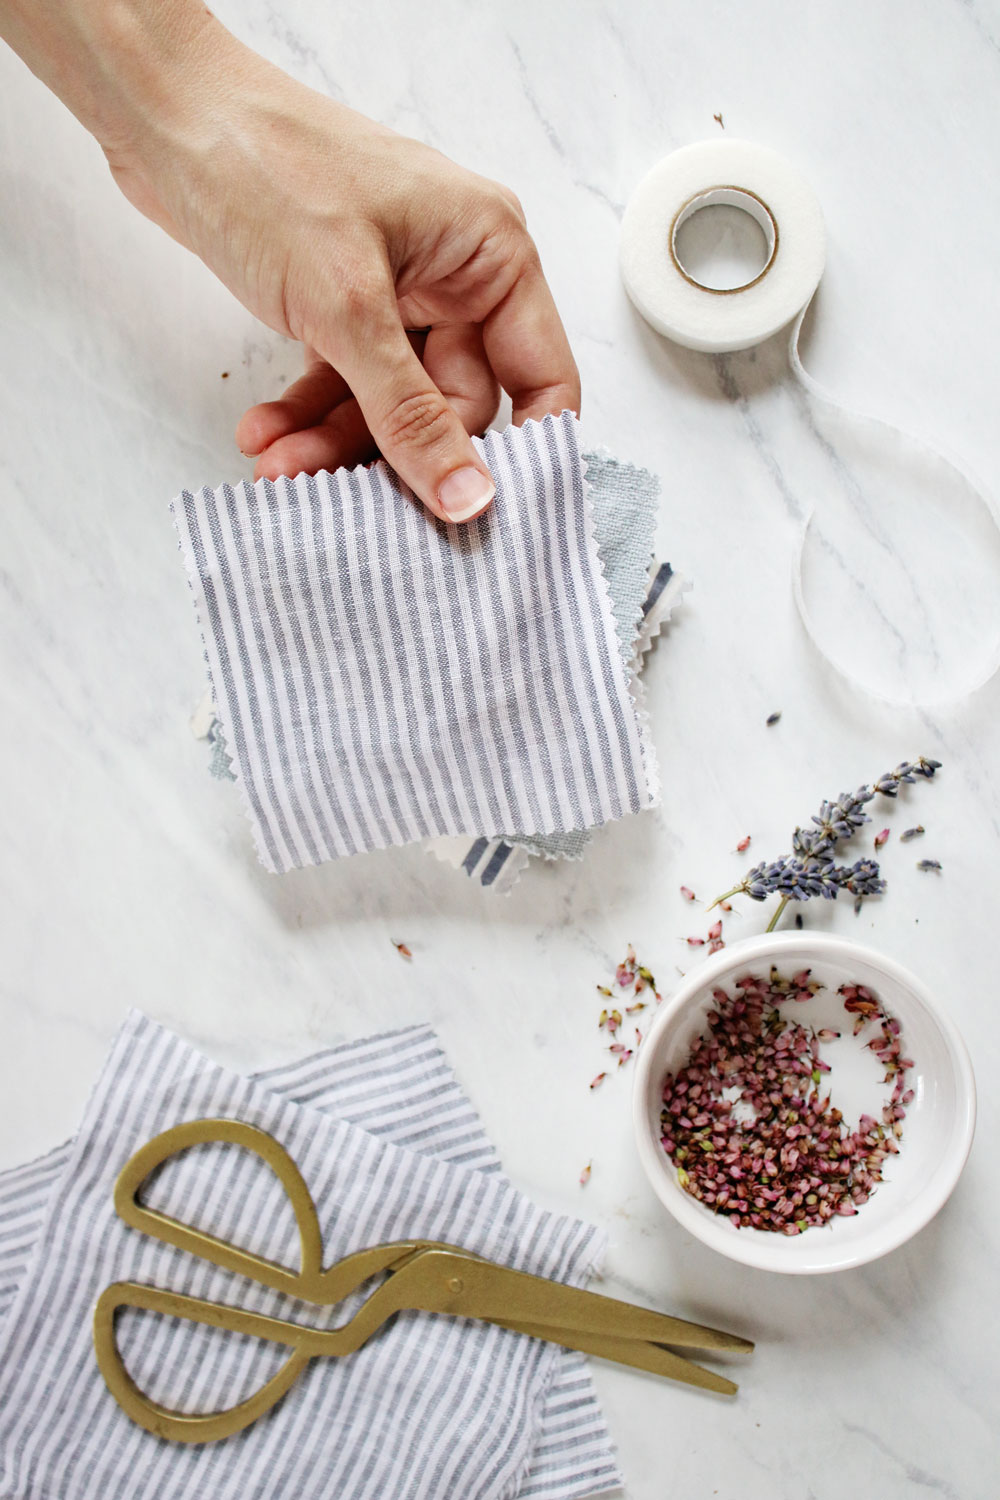 10 Amazing DIY Uses for Lavender - Herbal Sachets